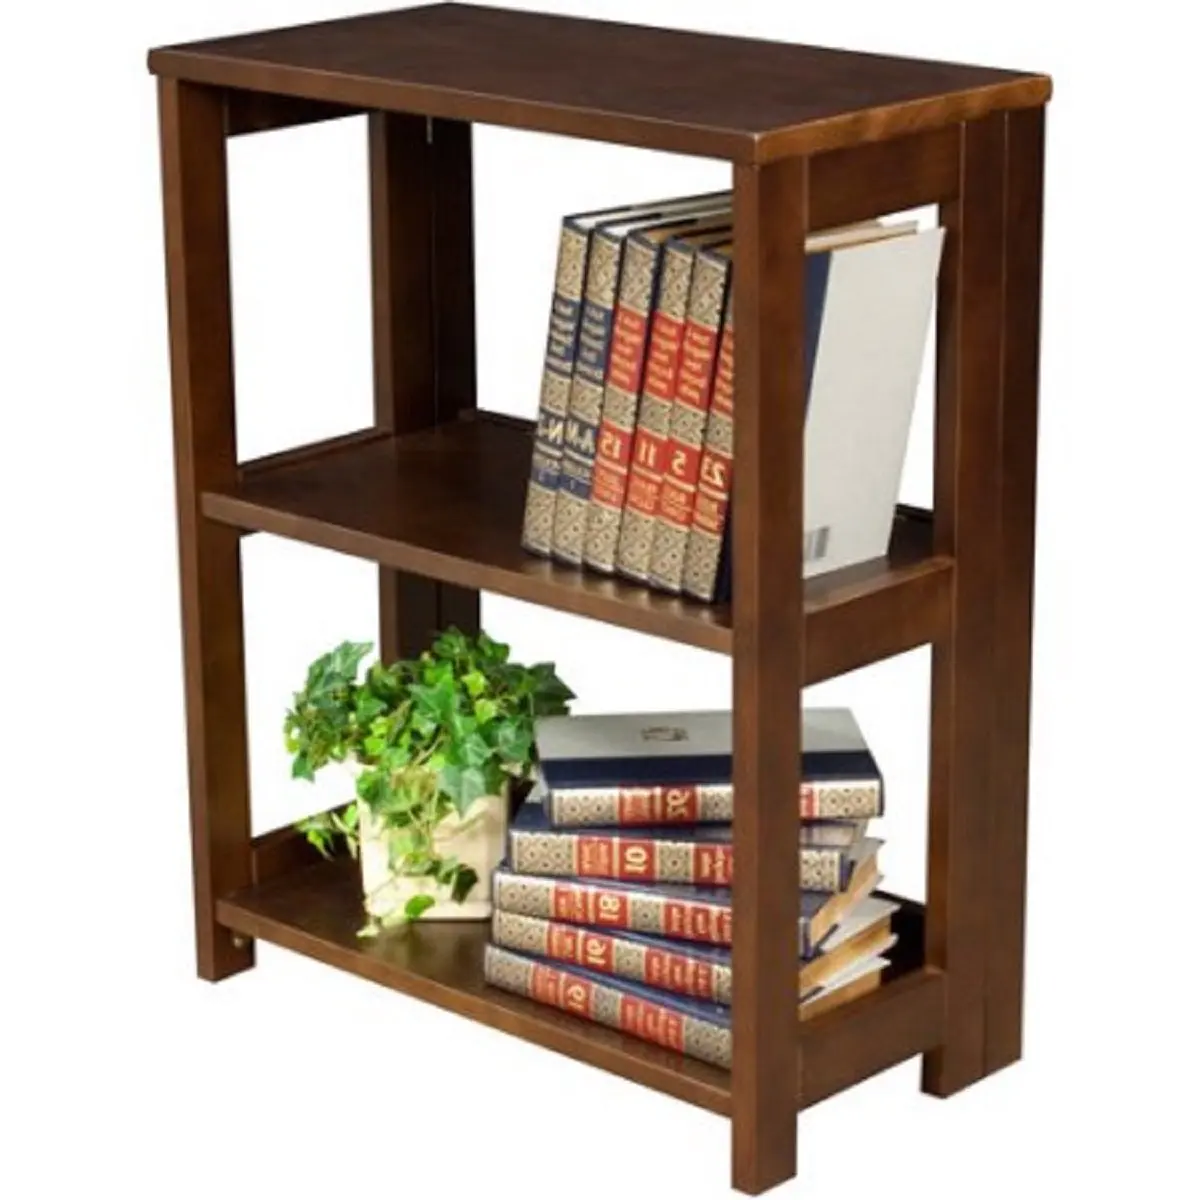 Cheap Easy Bookcase Plans Find Easy Bookcase Plans Deals On Line